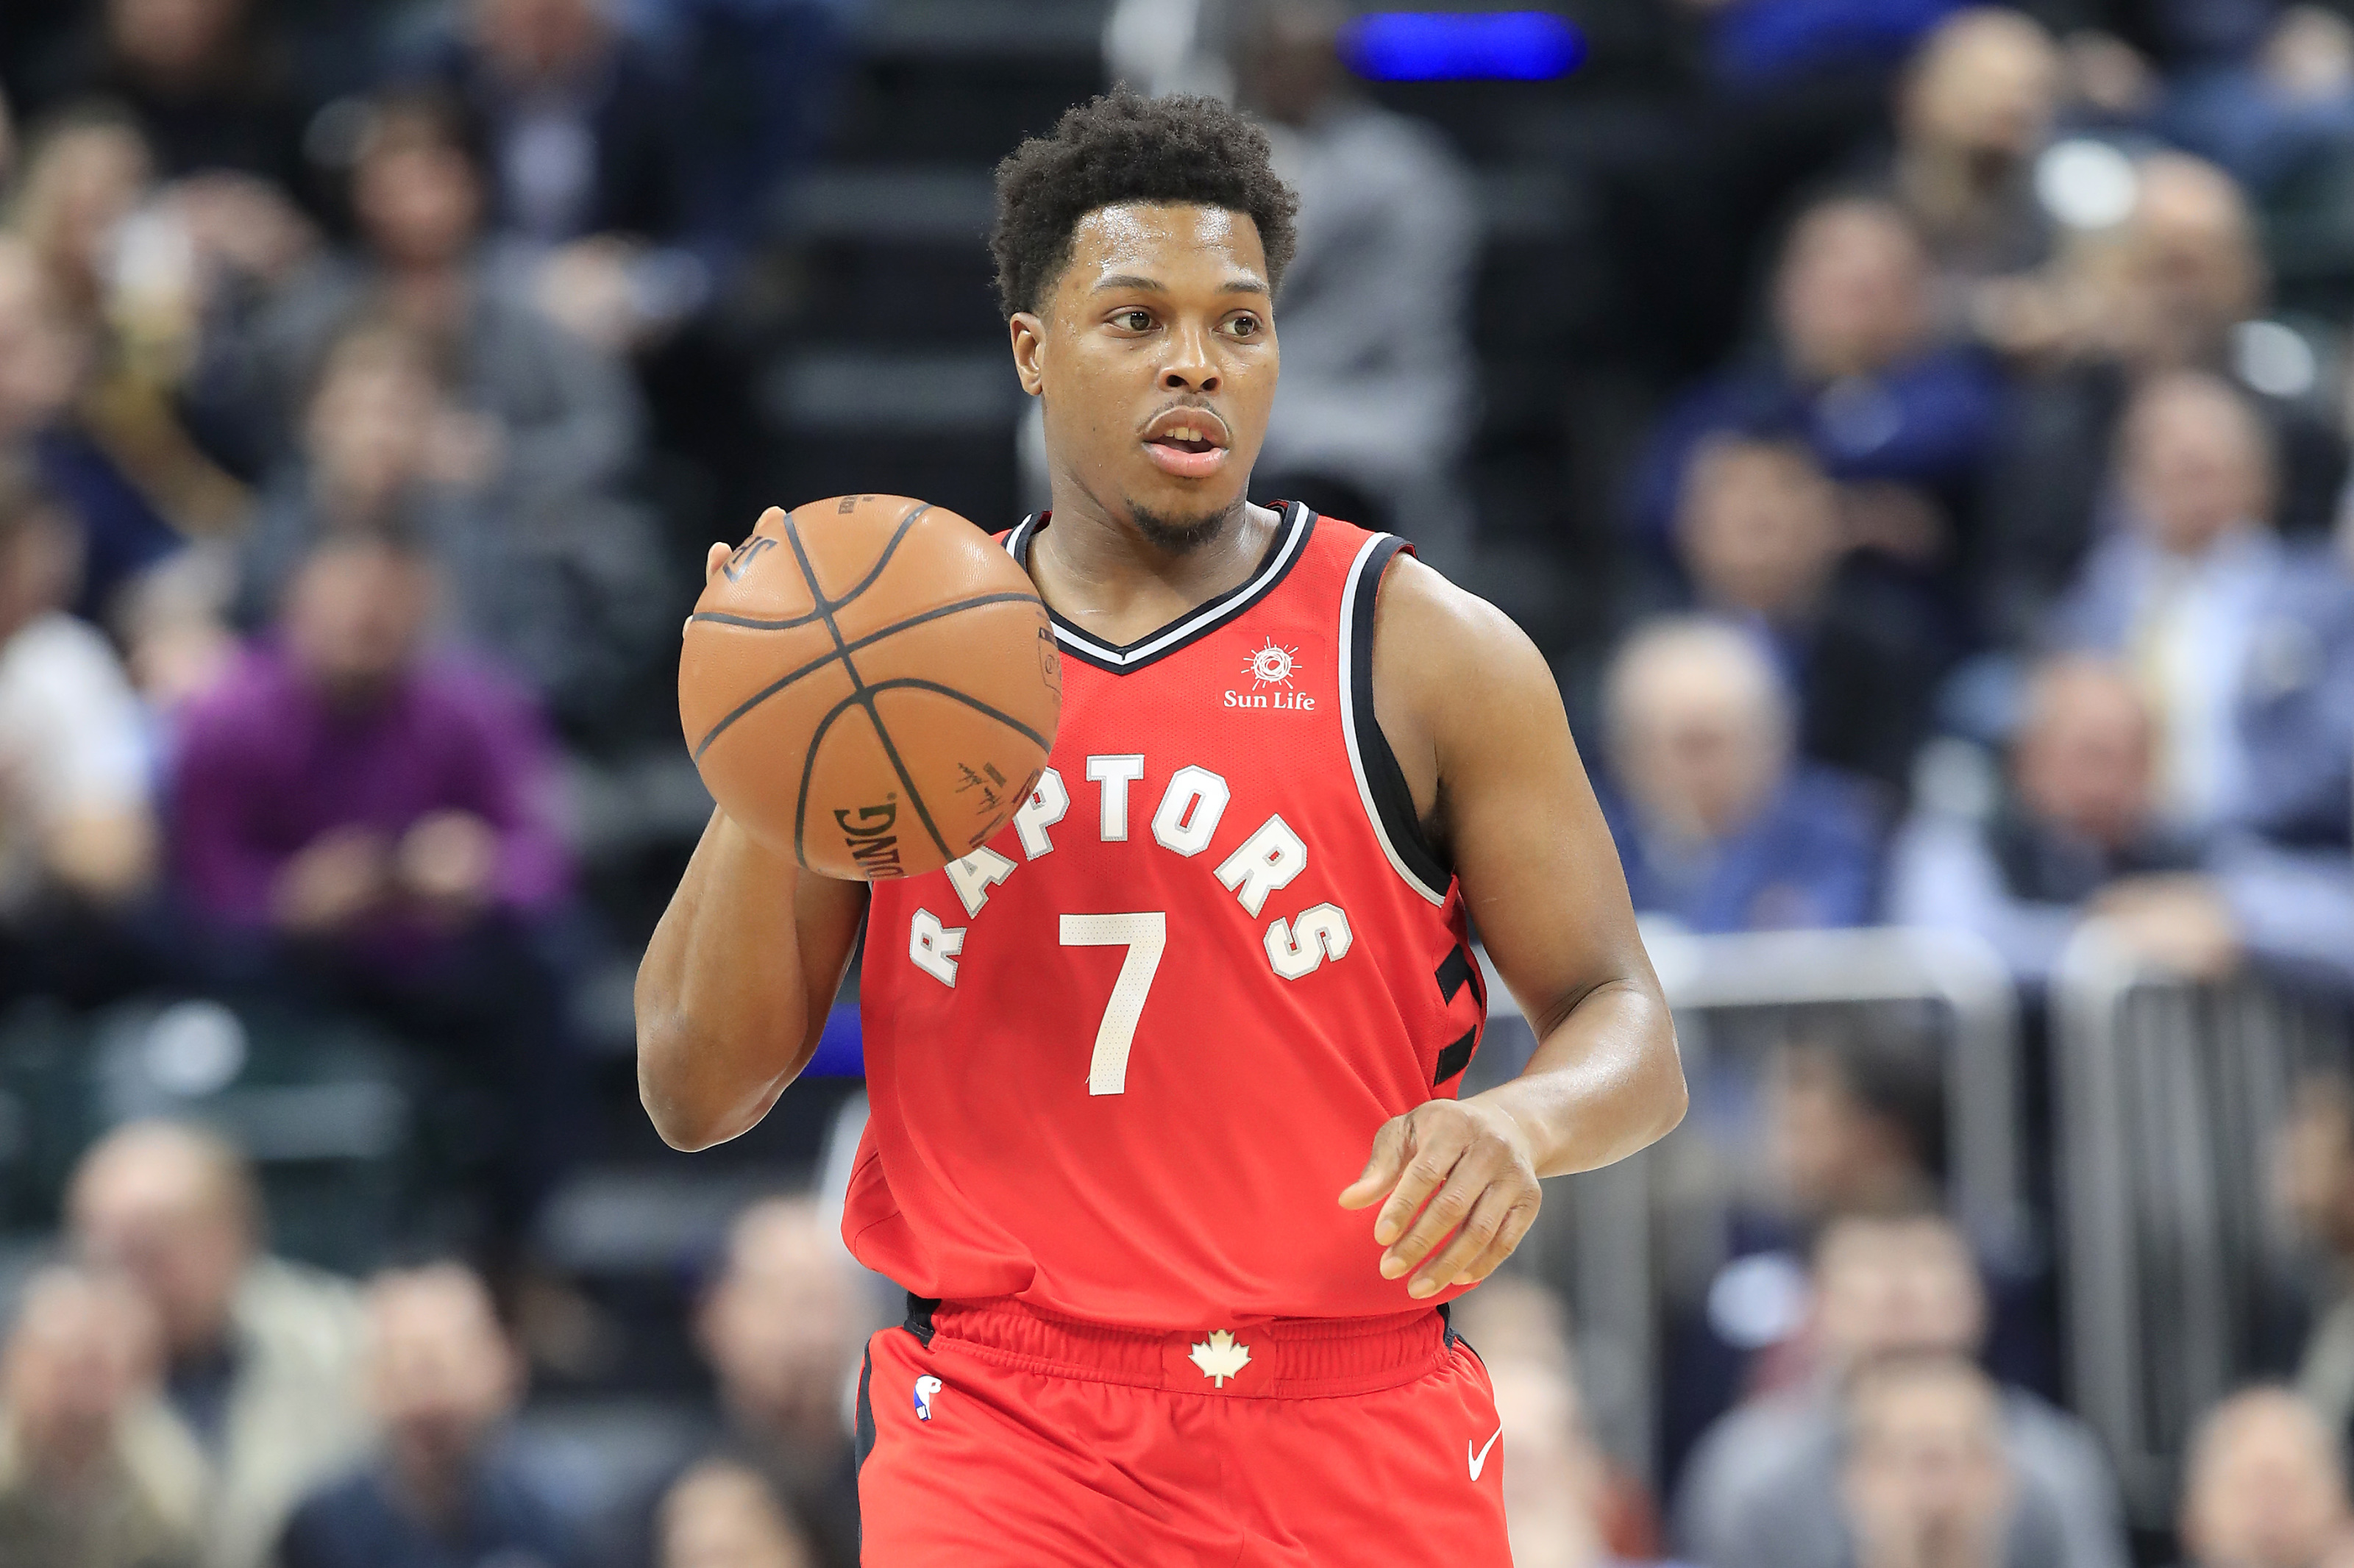 Kyle Lowry reflects on Toronto: 'That's still home